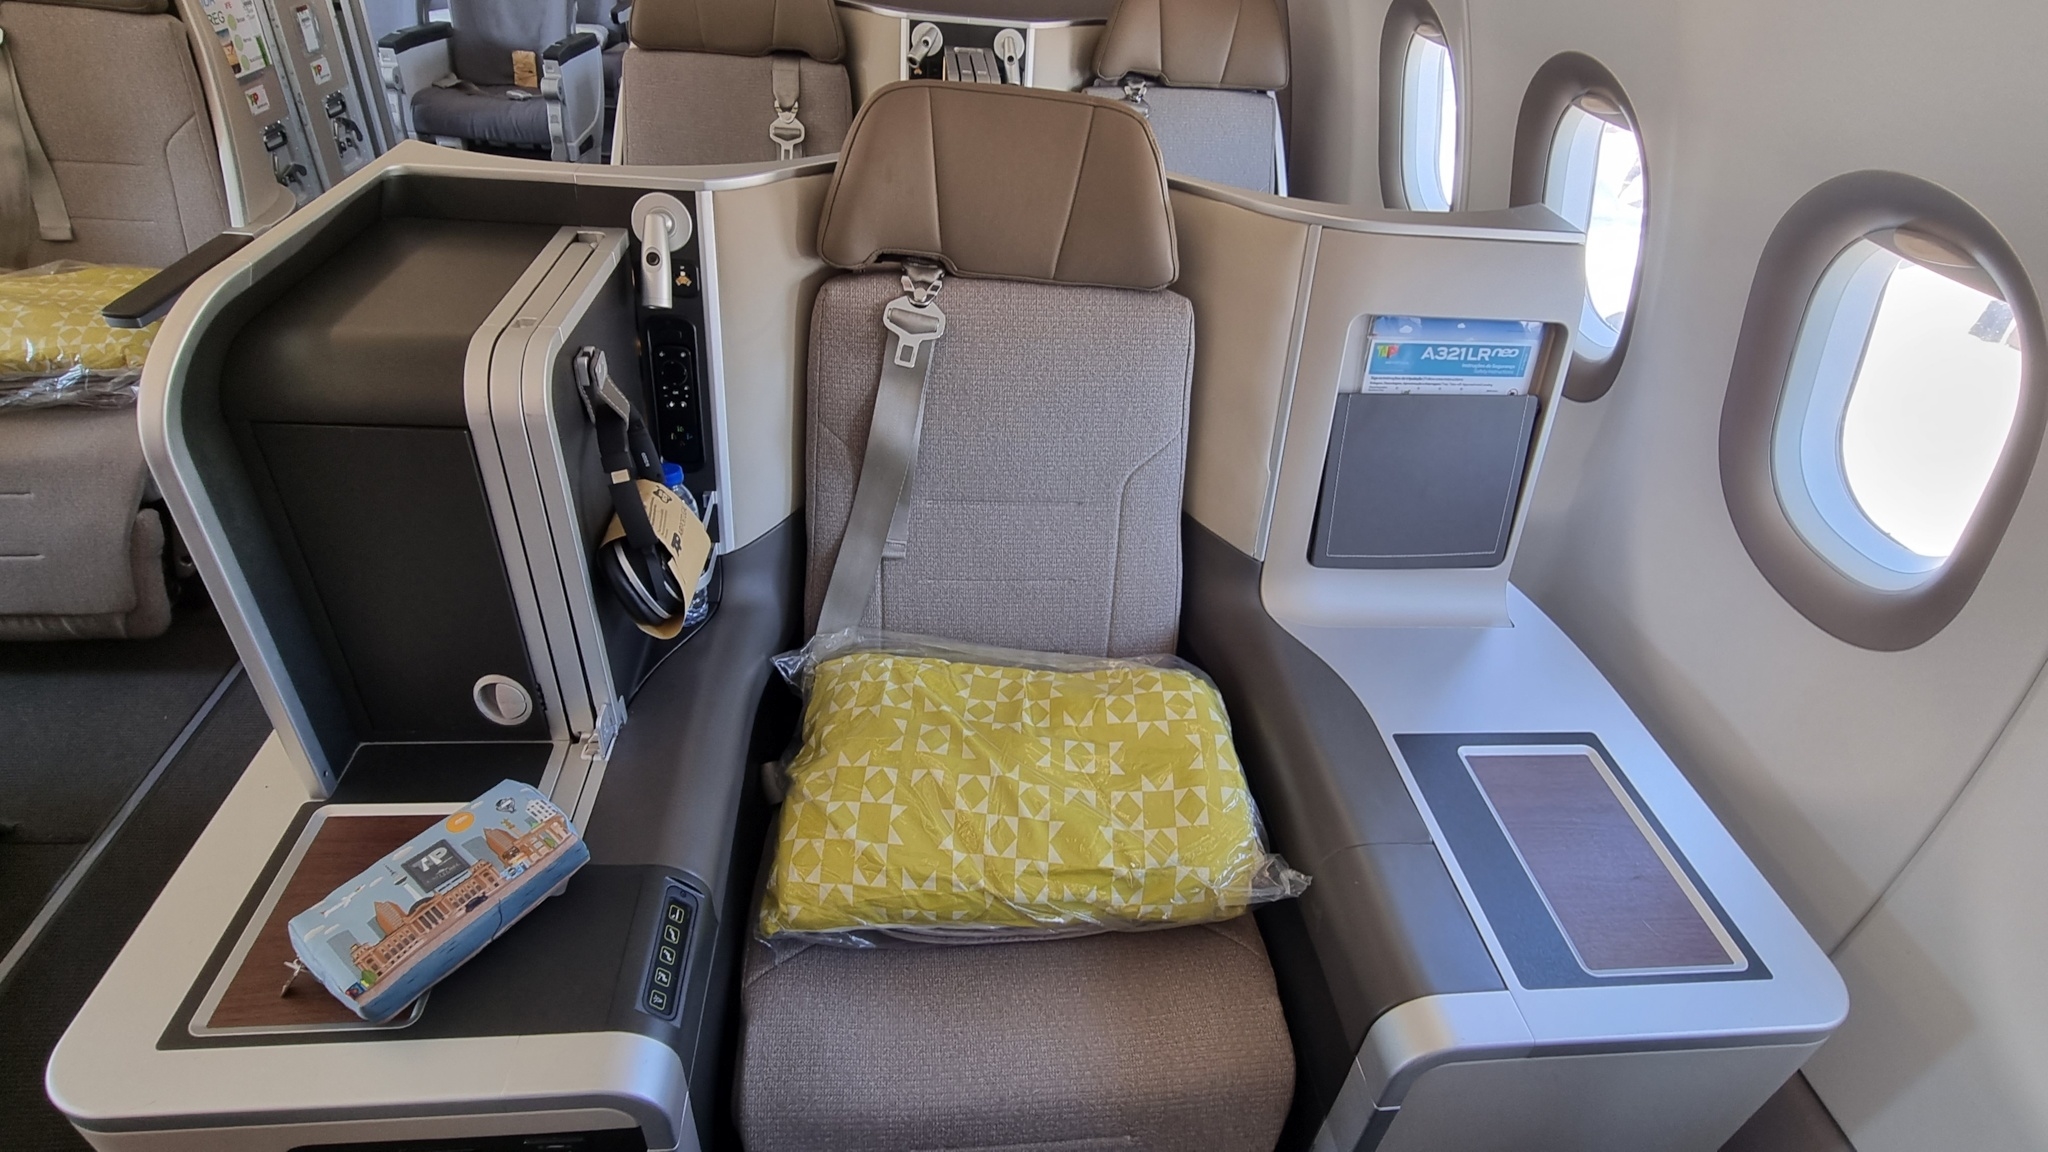 tap_a321neo_business_class_seat